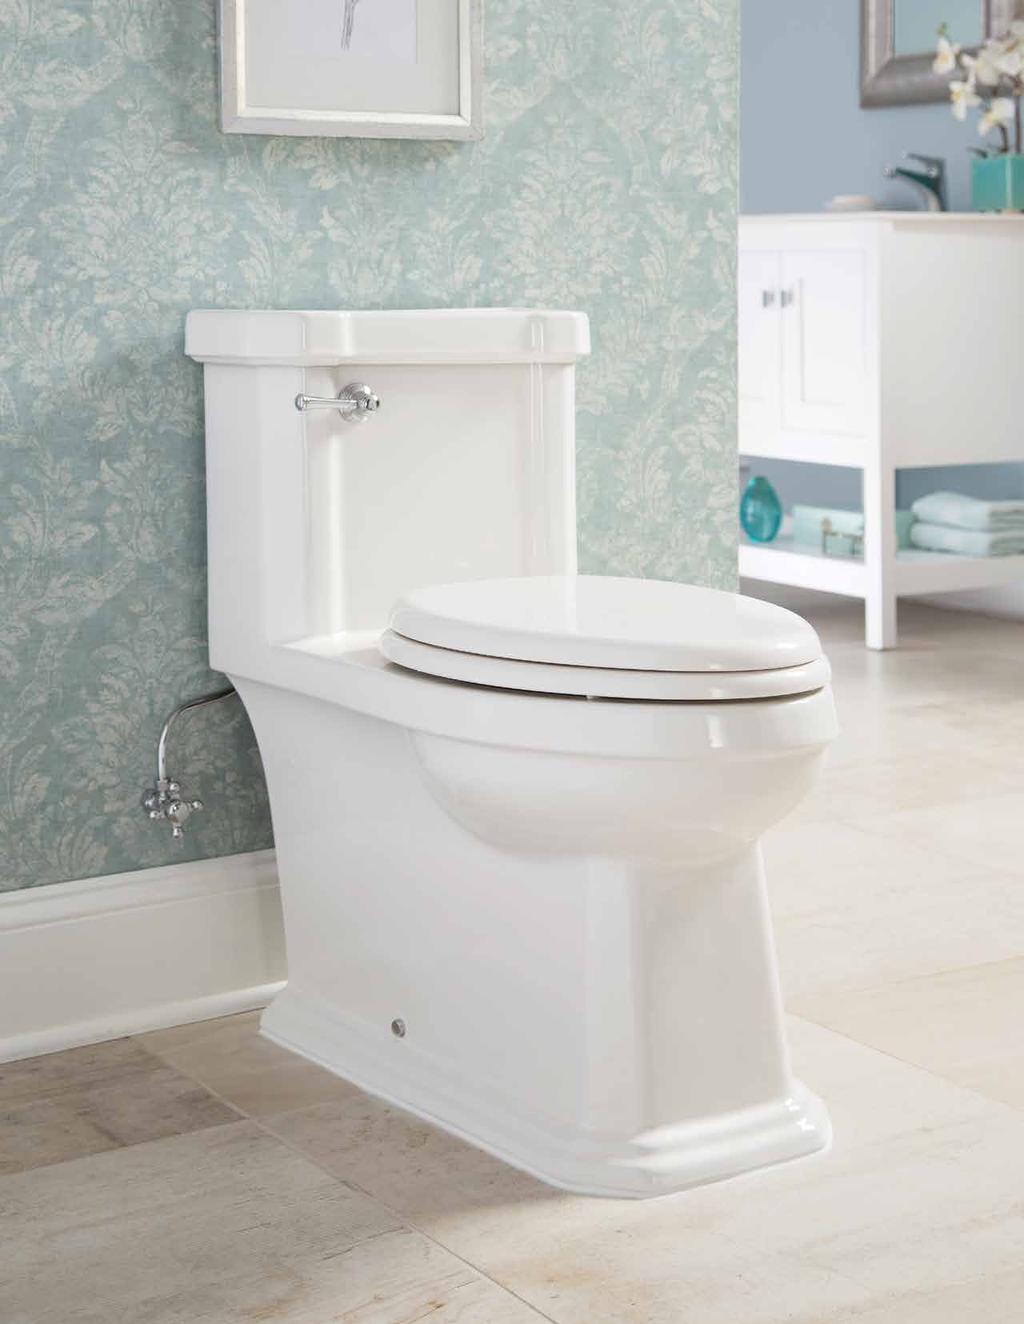 AMBERLEY COLLECTION Amberley's classic design is rooted in renowned architectural style.